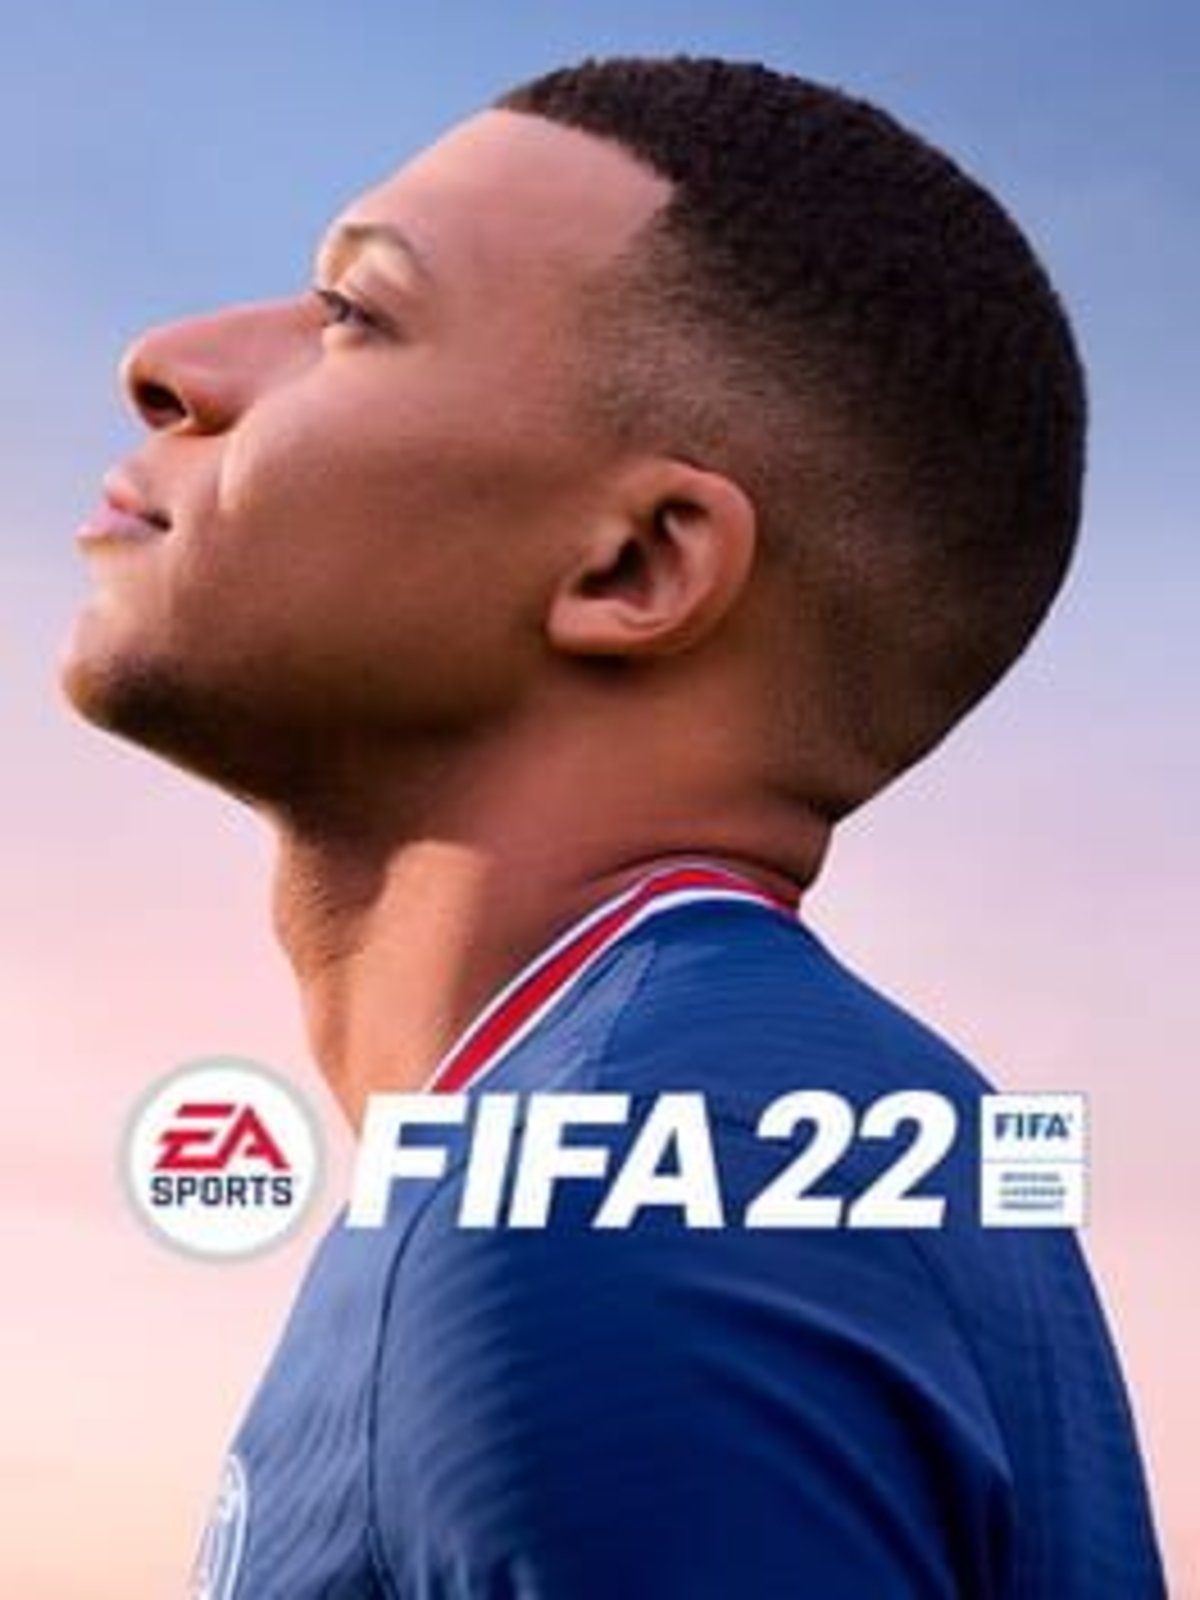 EA explains why the PC version of FIFA 22 will be lower than the console version